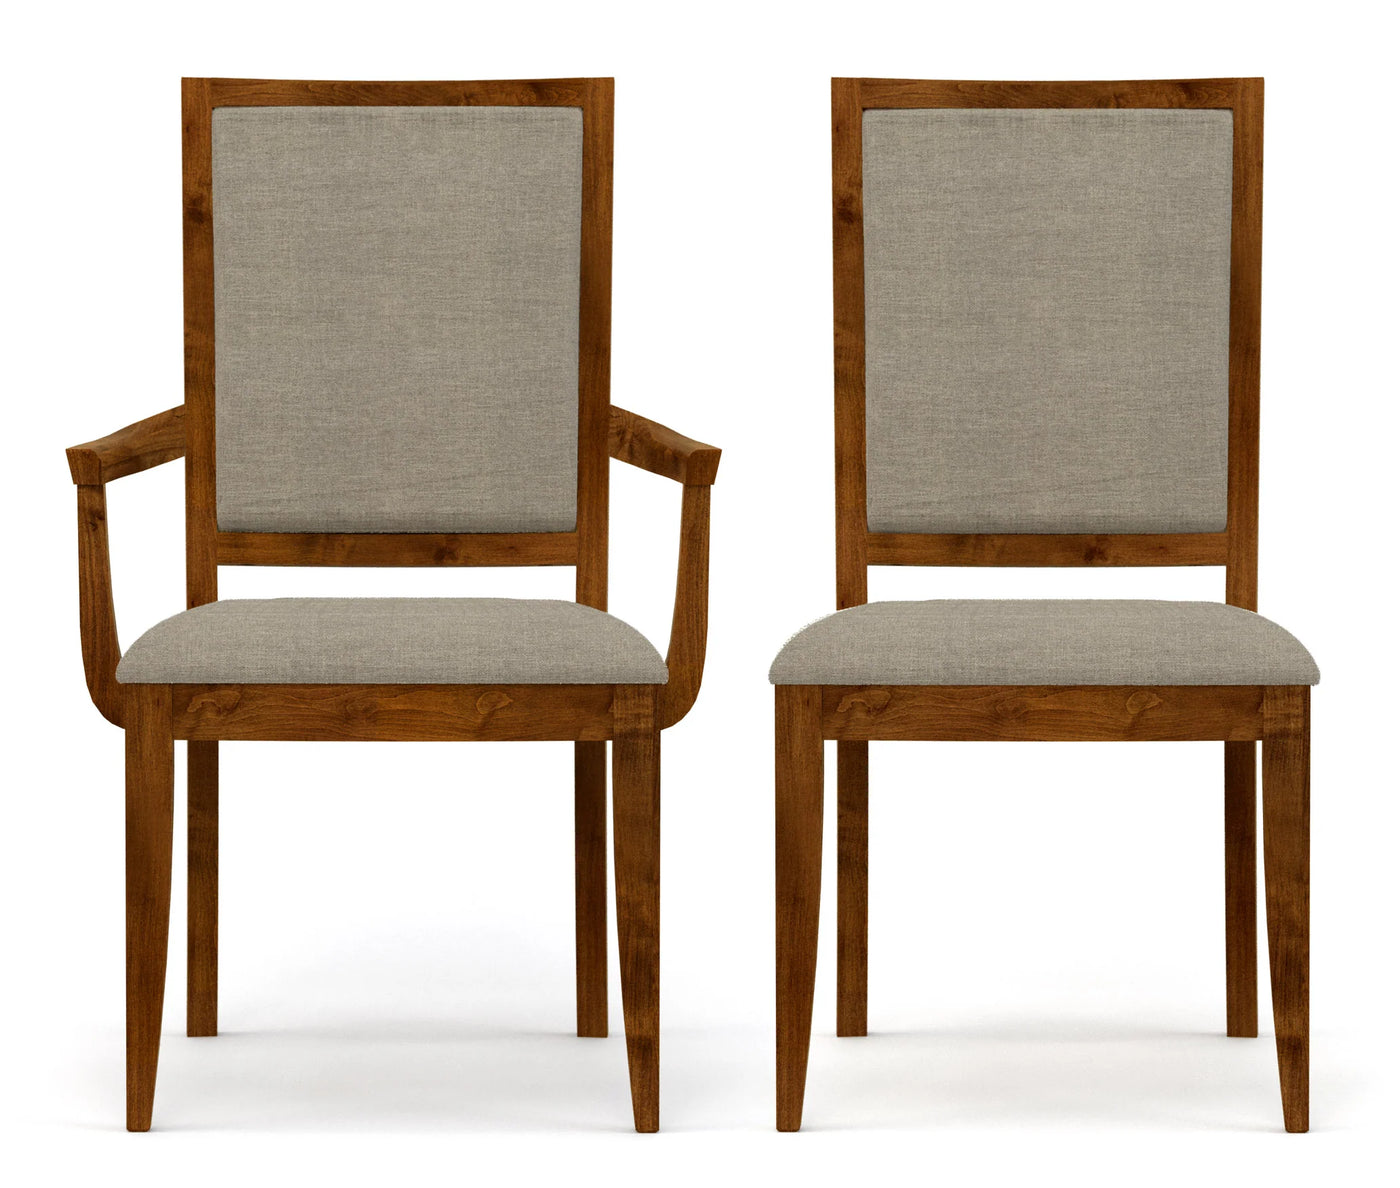 Two Origins Upholstered Chairs, side by side against a white background